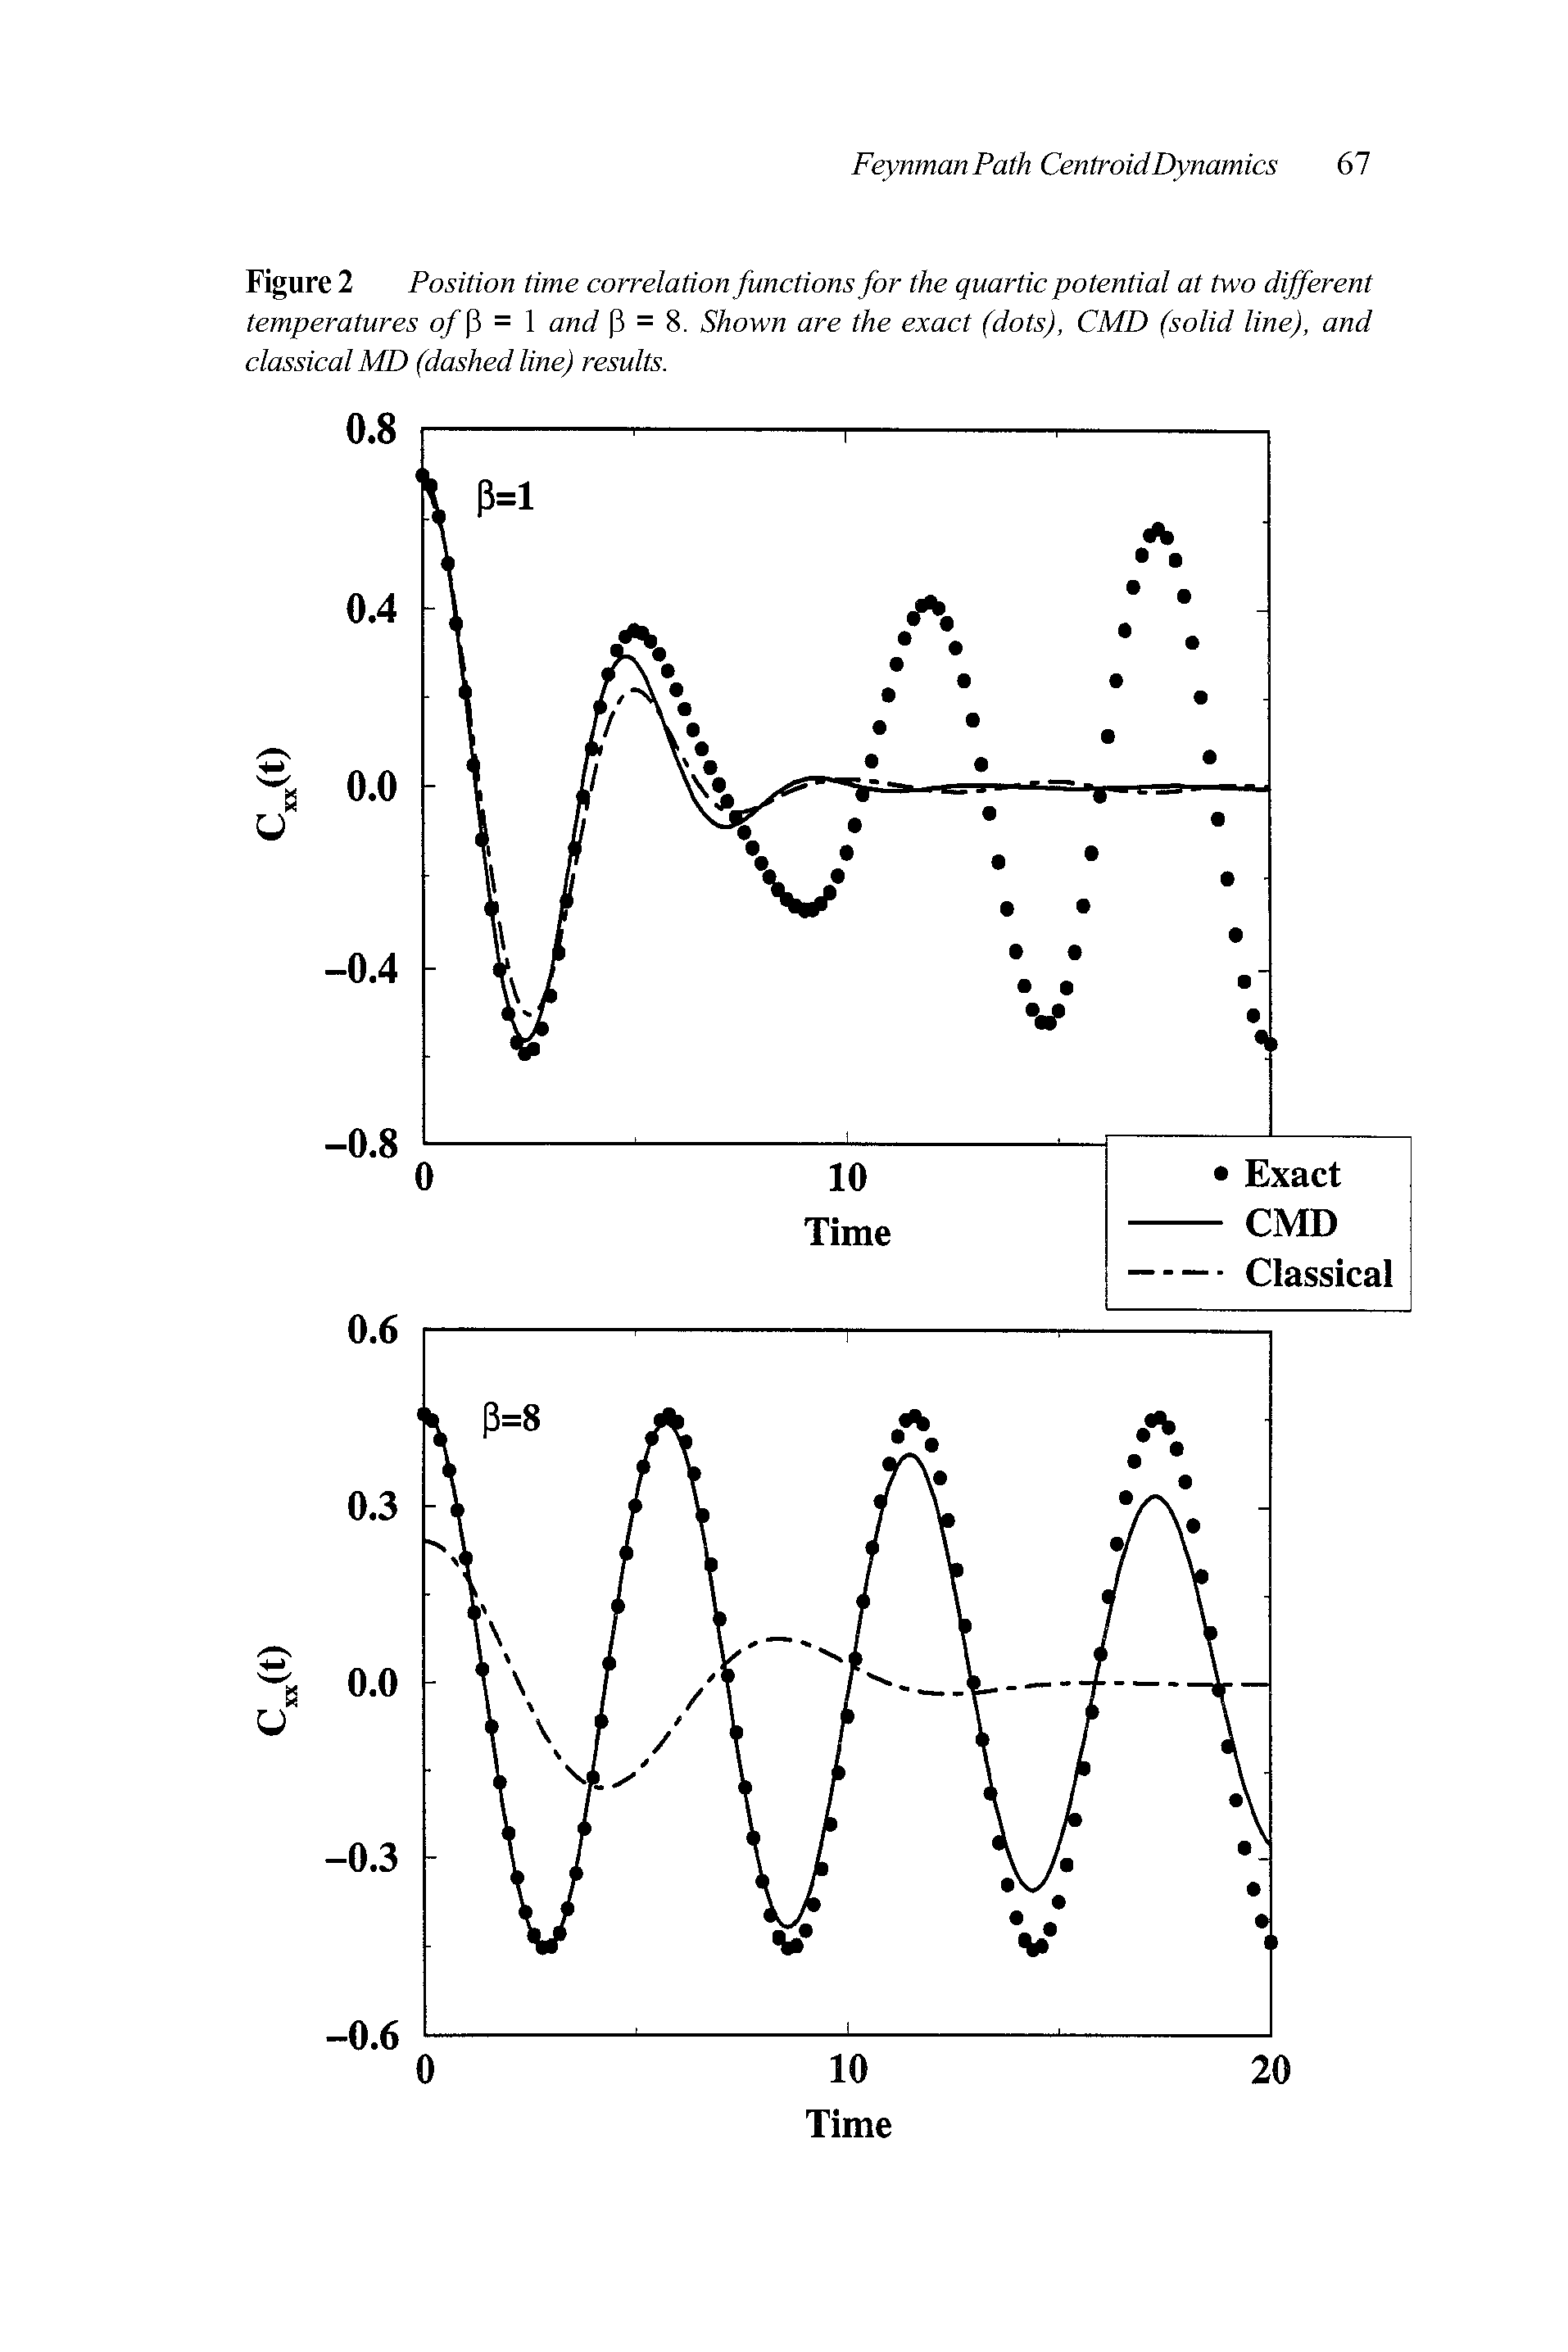 Figure 2 Position time correlation functions for the quartic potential at two different temperatures o/P = 1 and P = 8. Shown are the exact (dots), CMD (solid line), and classical MD (dashed line) results.